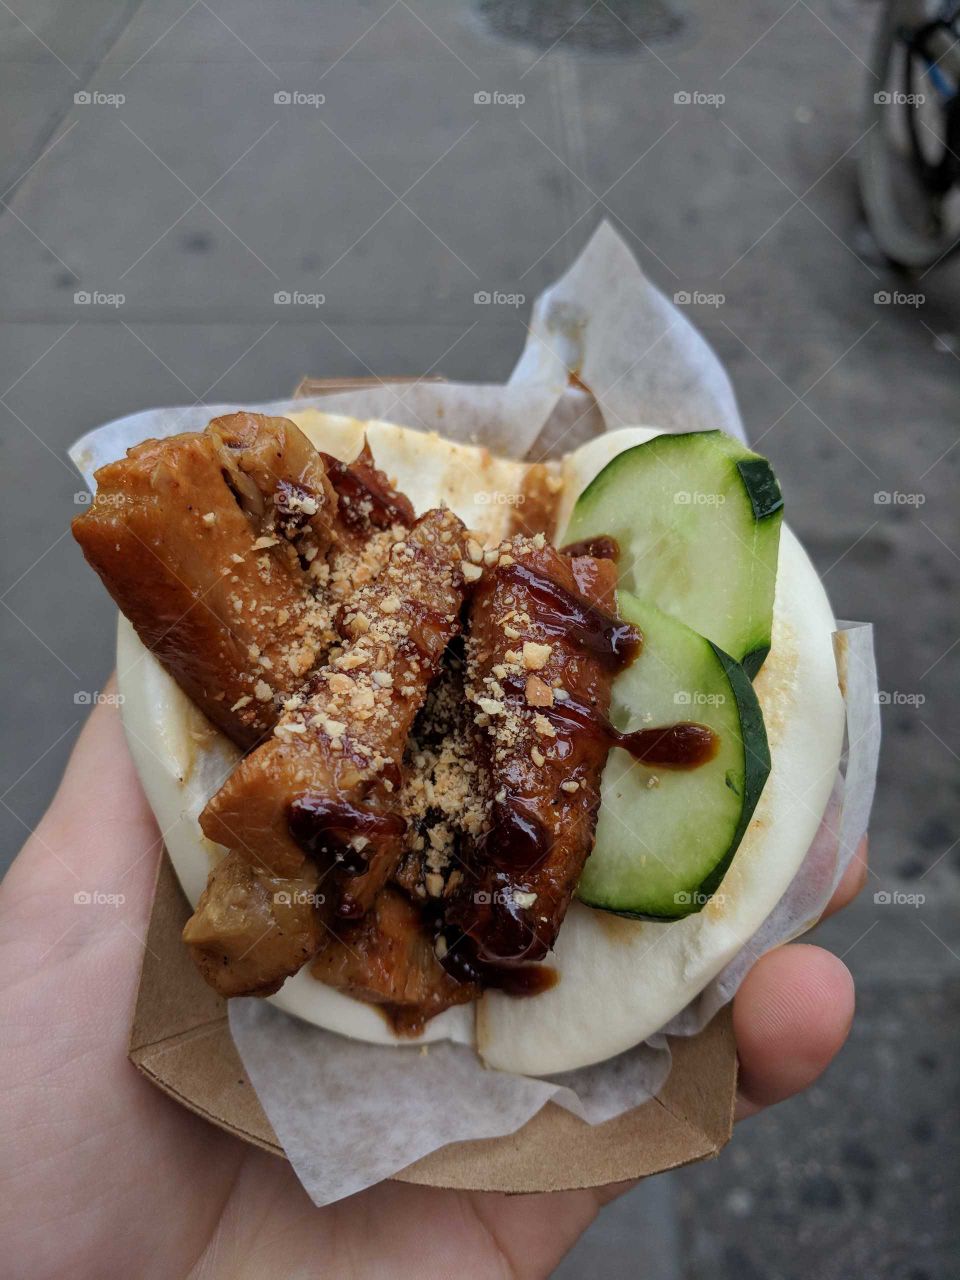 Chinese/Taiwanese Pork Belly Gua Bao on a Steamed Bun with Cucumbers - Delicious Street Food from a New York City Fair/Food Festival/Urbanspace Garment District (Bao by Kaya)